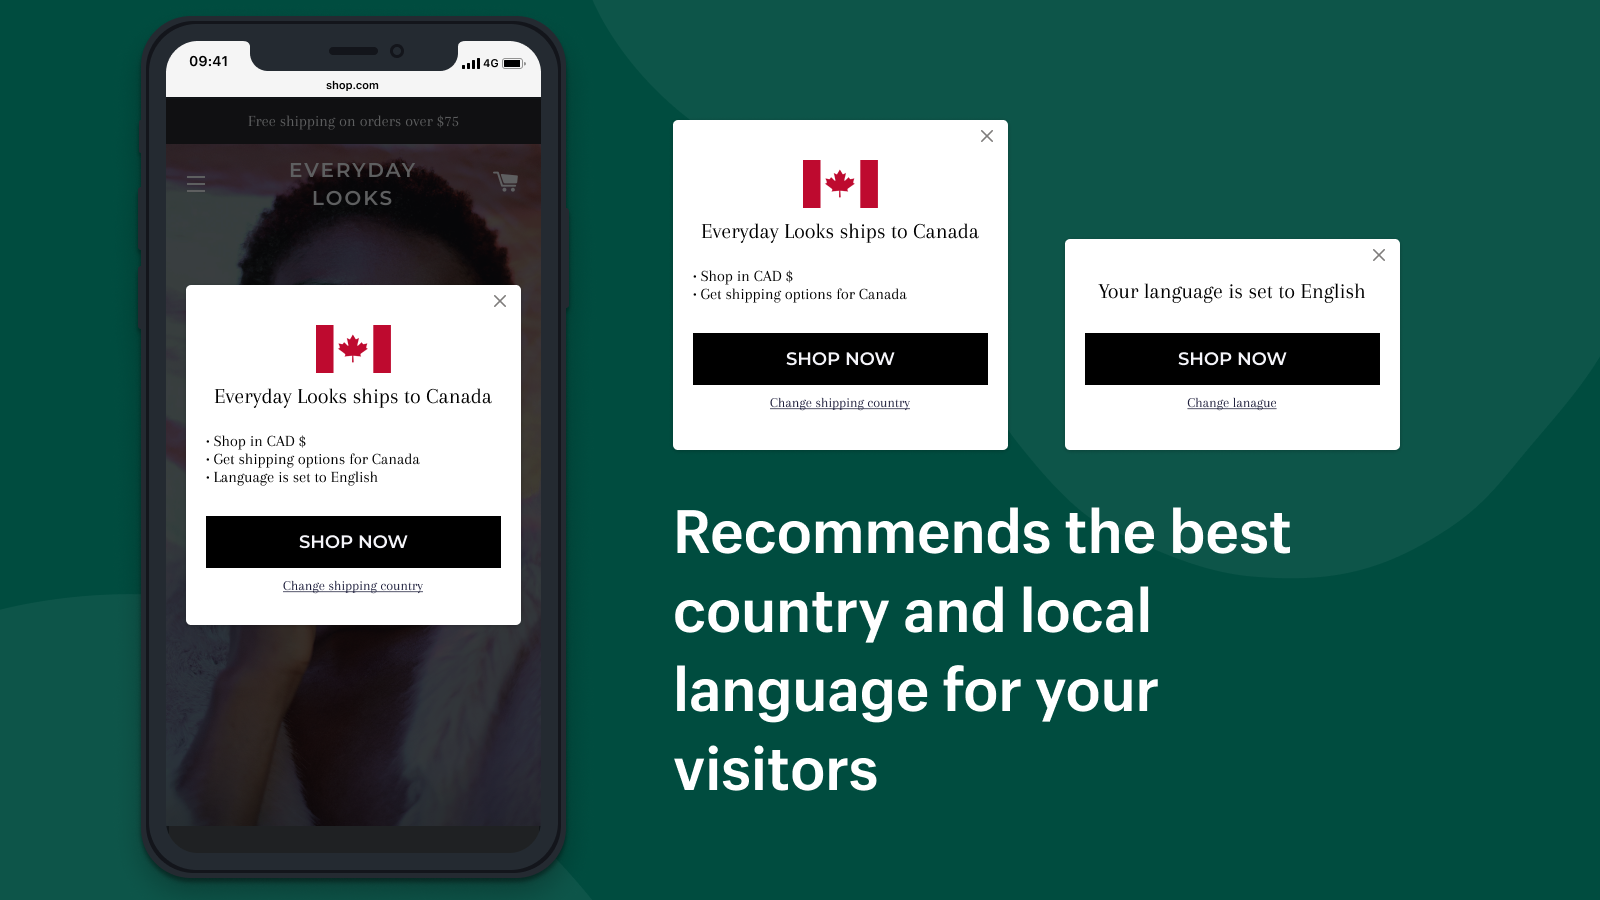 Recommends the best country and local language for your visitors